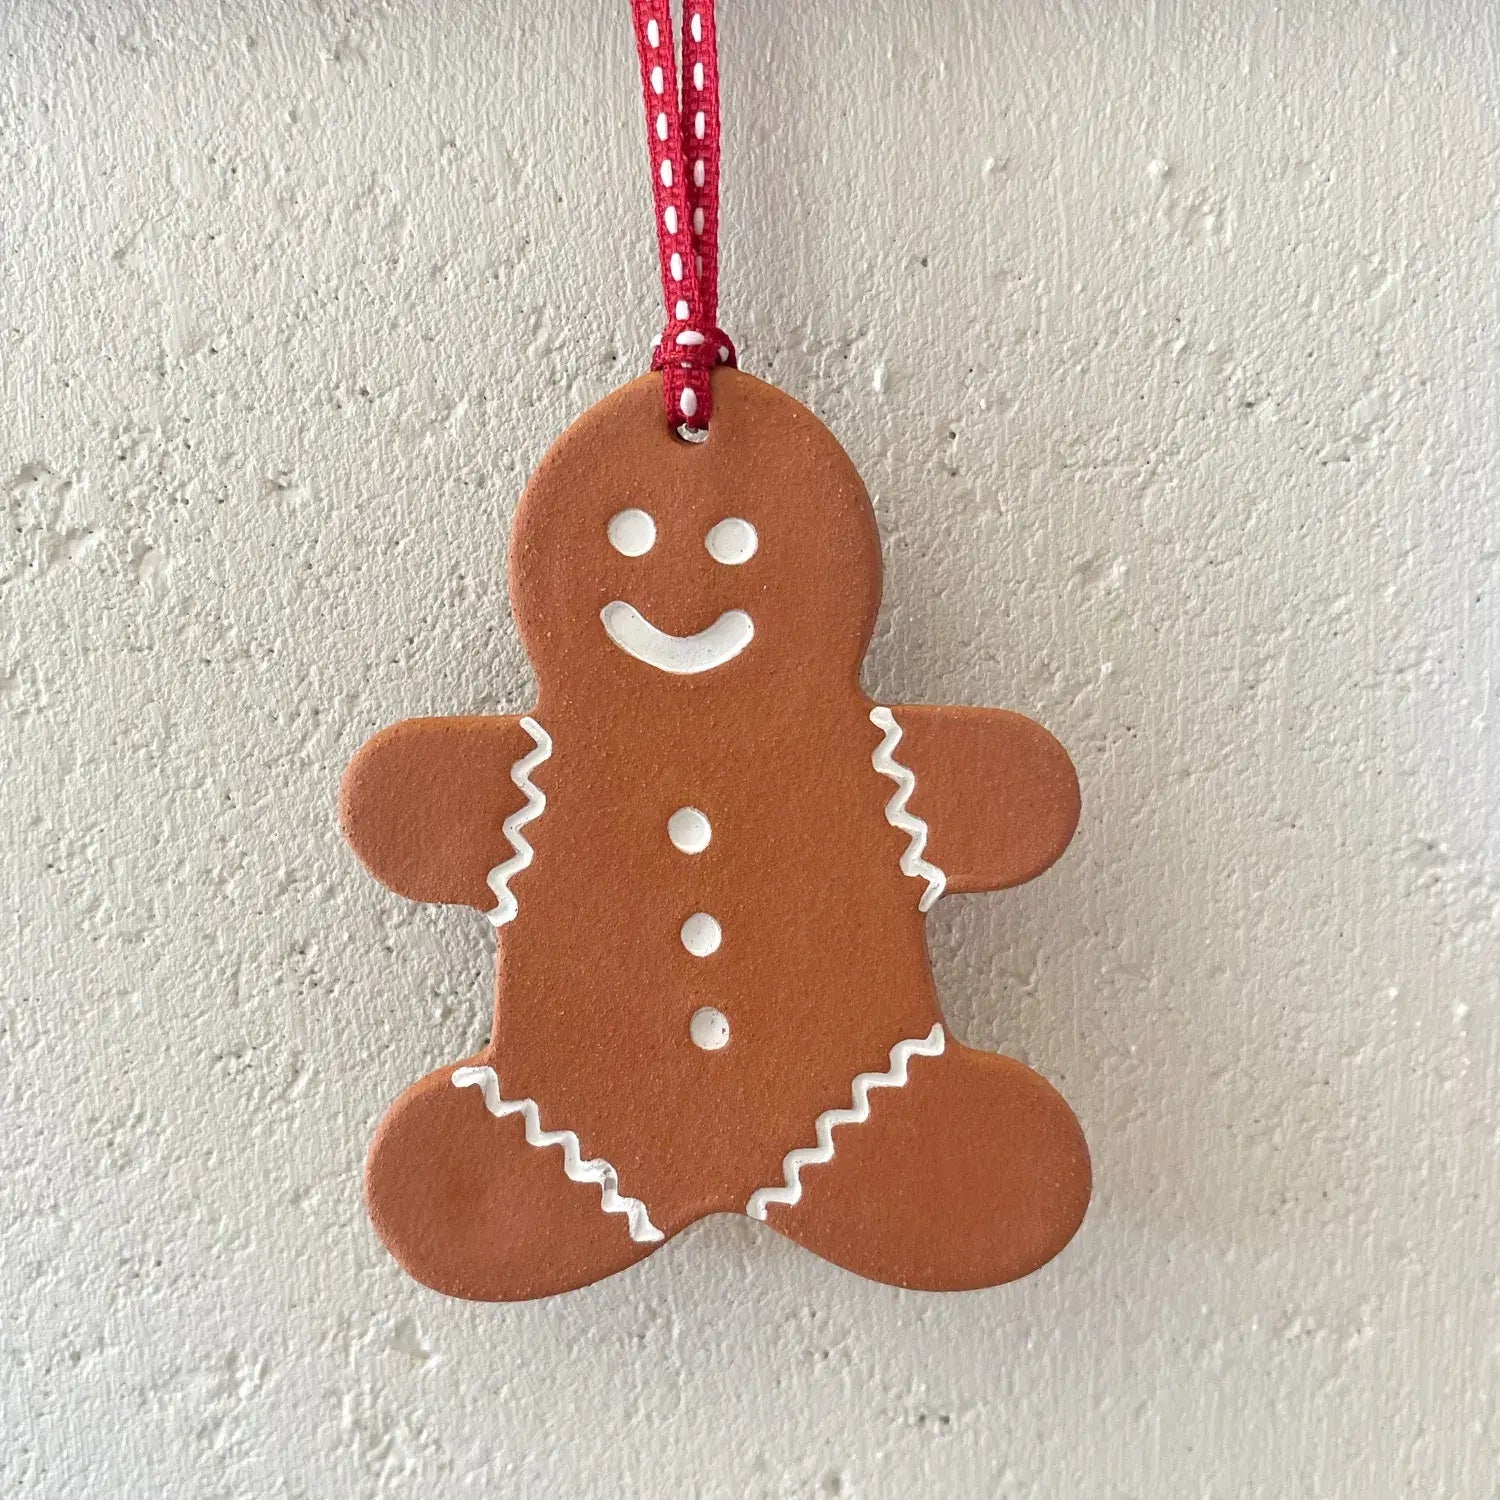 Paper Boat Press - Handmade Clay Christmas Tree Decoration - Gingerbread Person